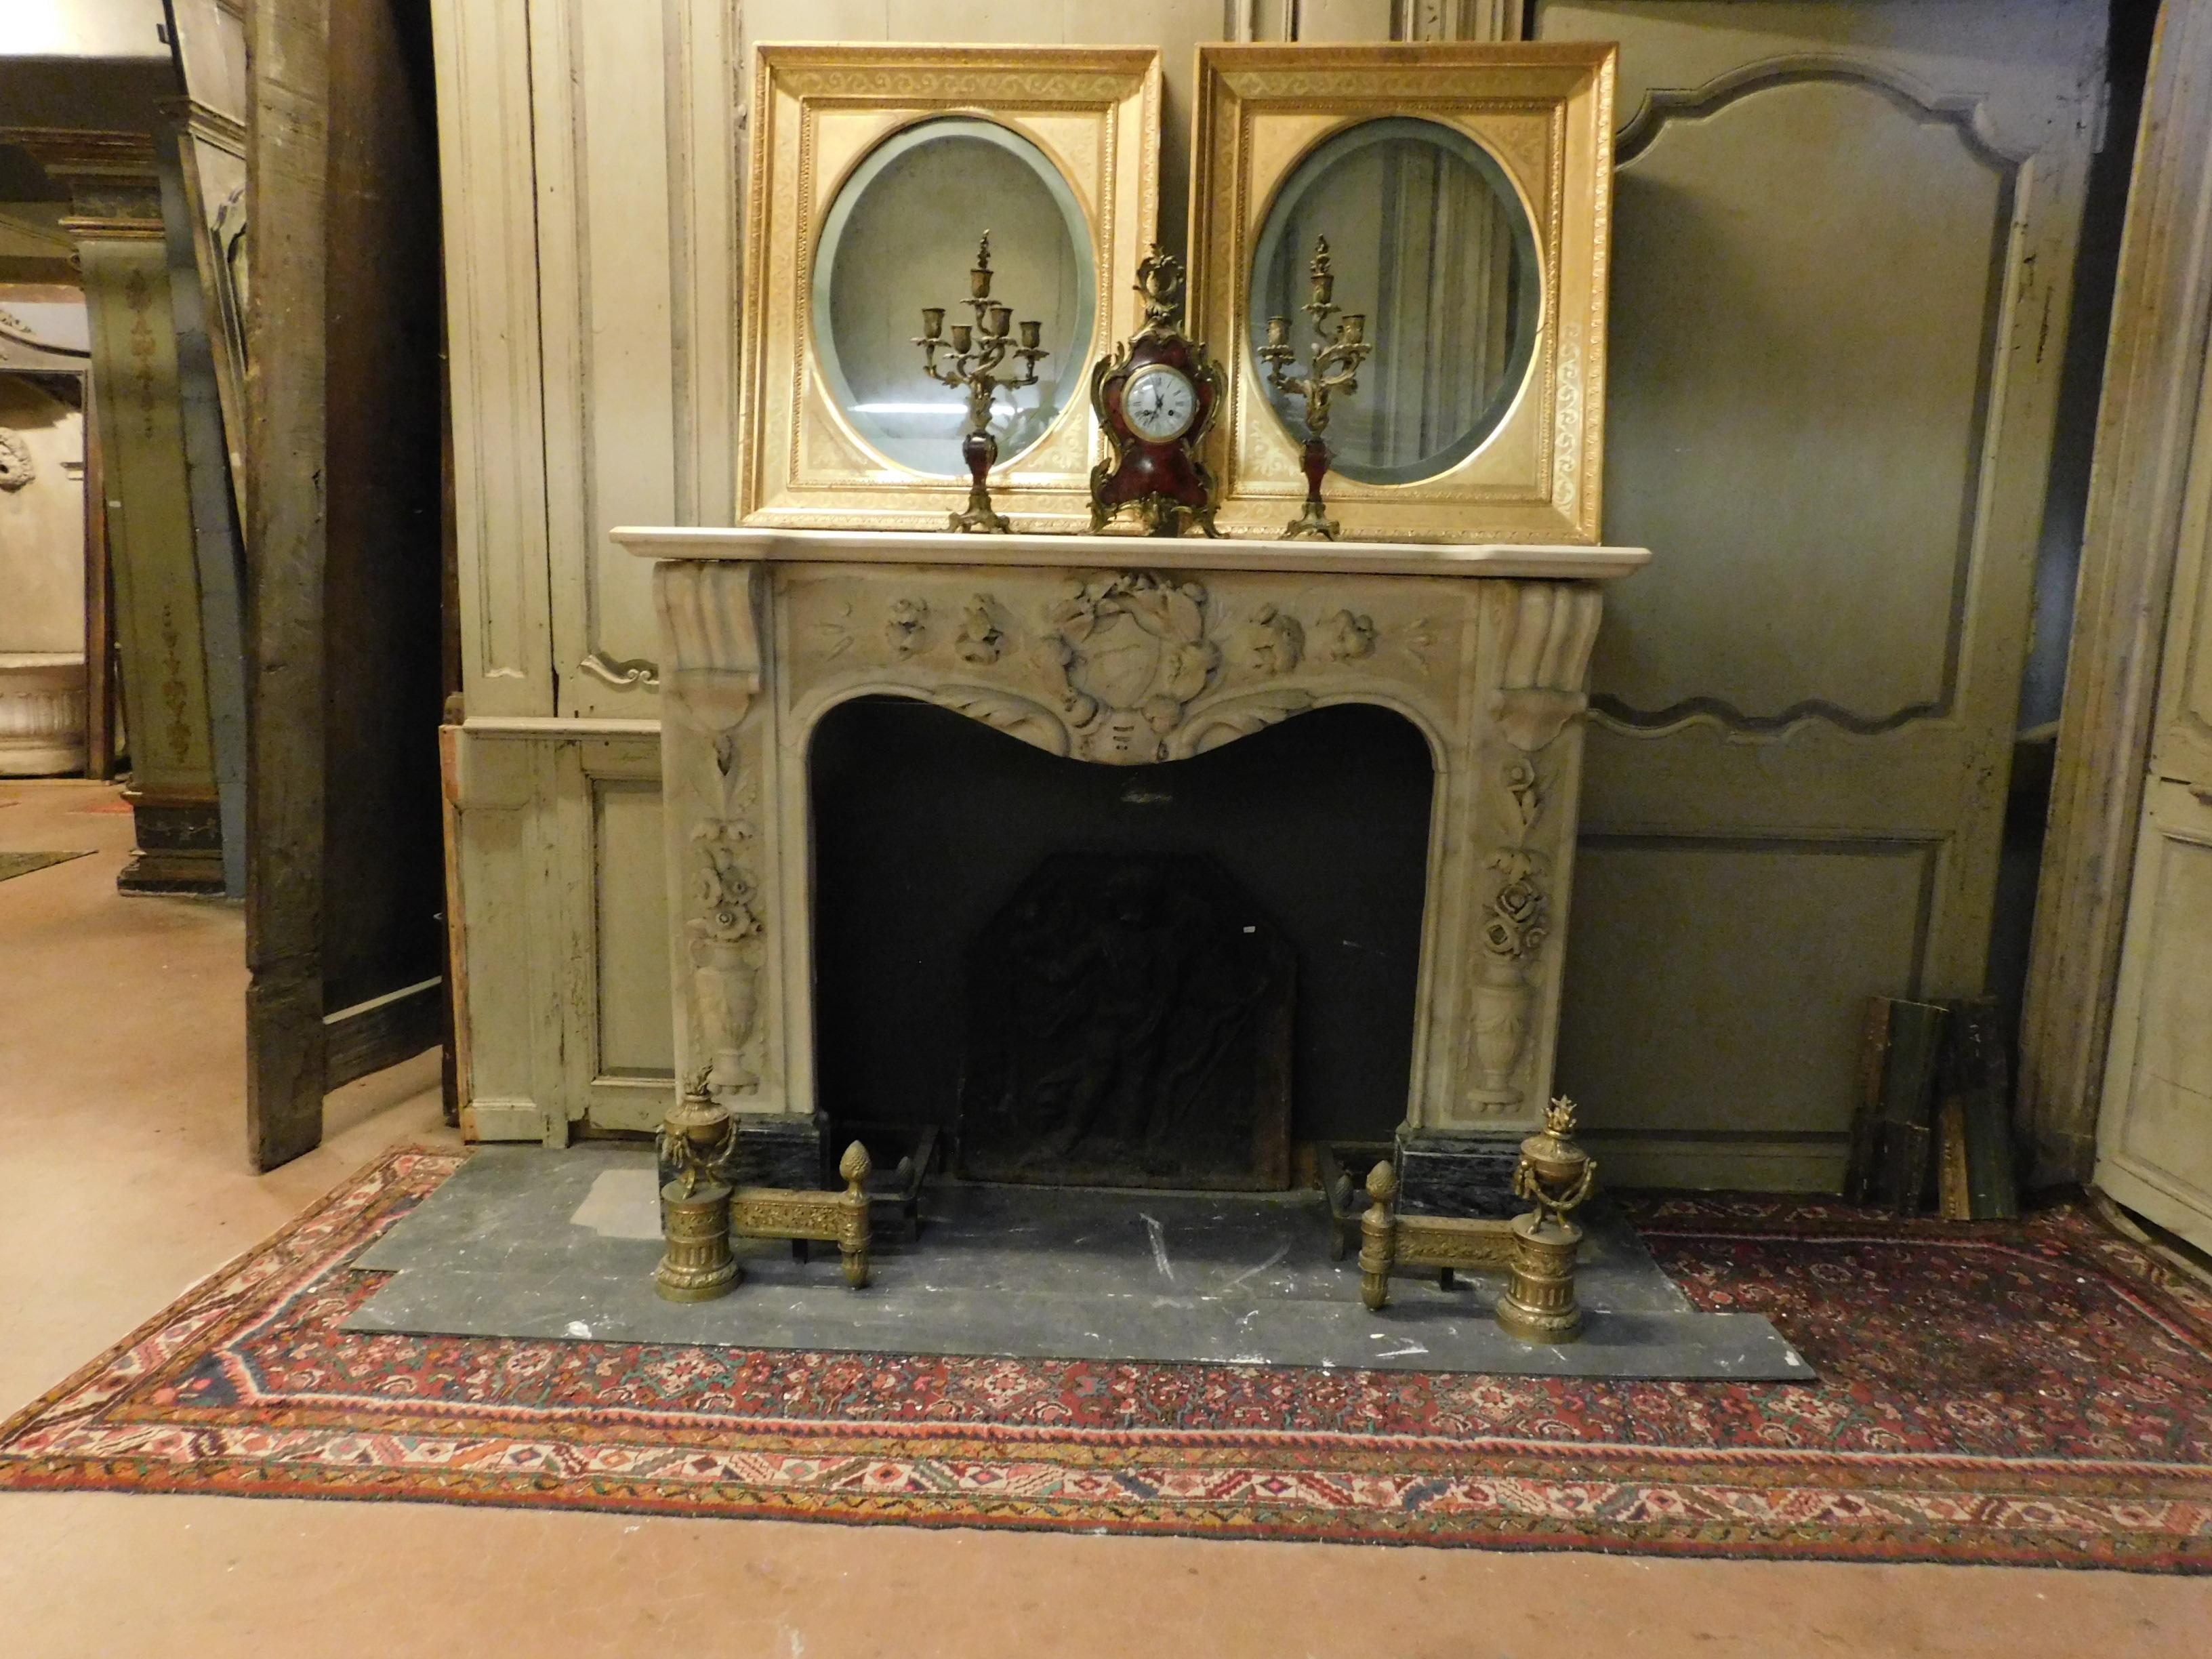 Antique white carrara marble fireplace, richly carved on all sides with contrasting gray marble feet, very rich and precious, rare to find in these conditions and so particular, mantel fireplace built entirely by hand in the second half of the